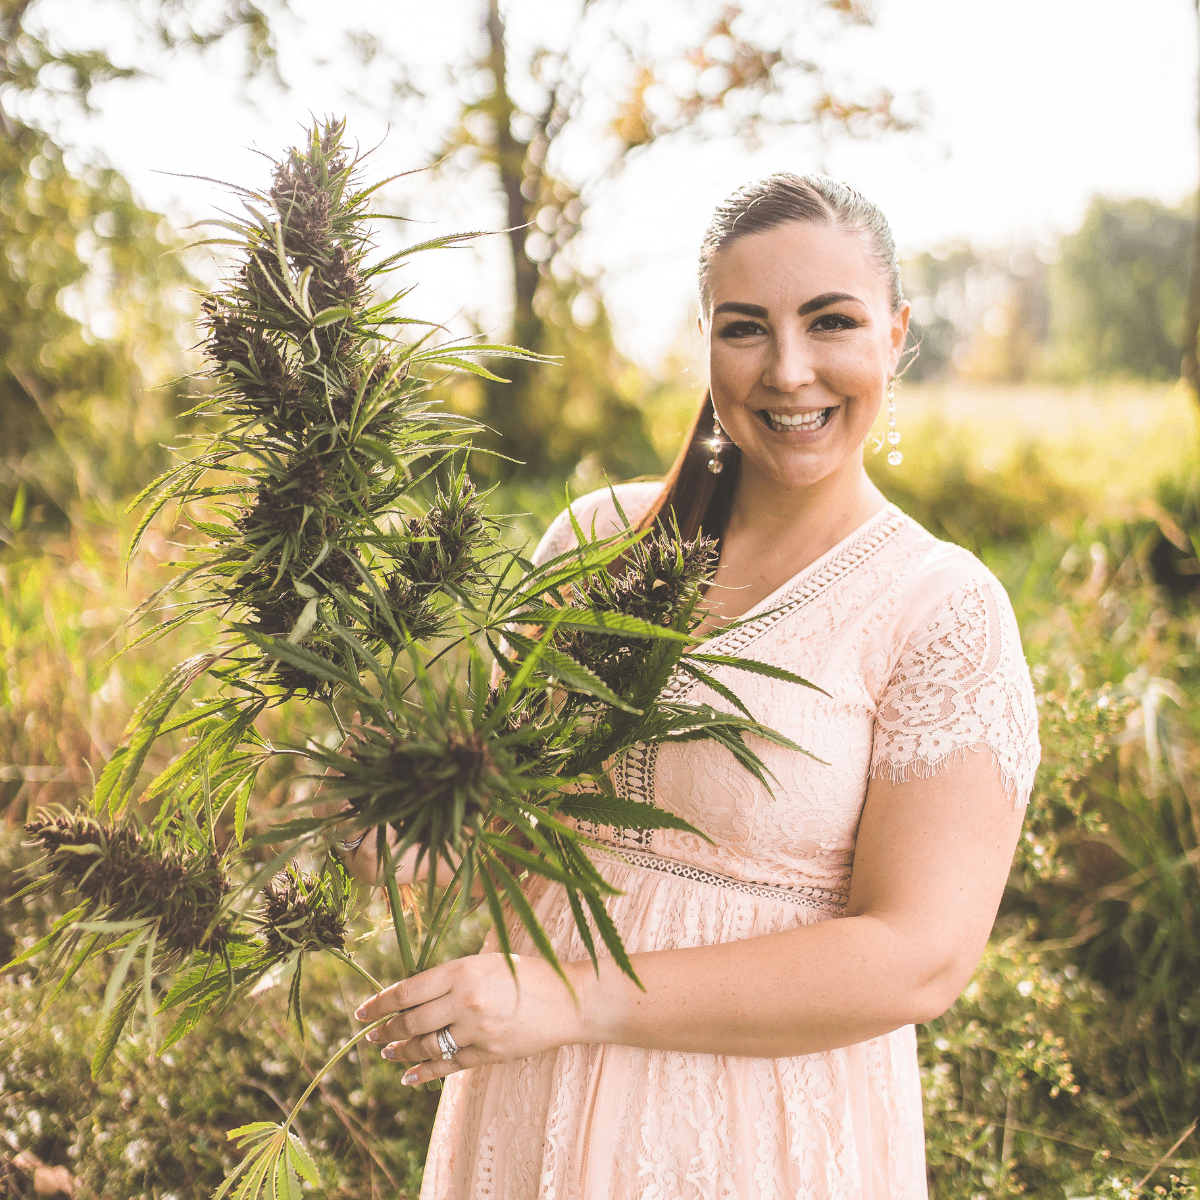 https://emilykylenutrition.com/wp-content/uploads/2022/10/Emily-Kyle-New-to-Cannabis-Guide.png